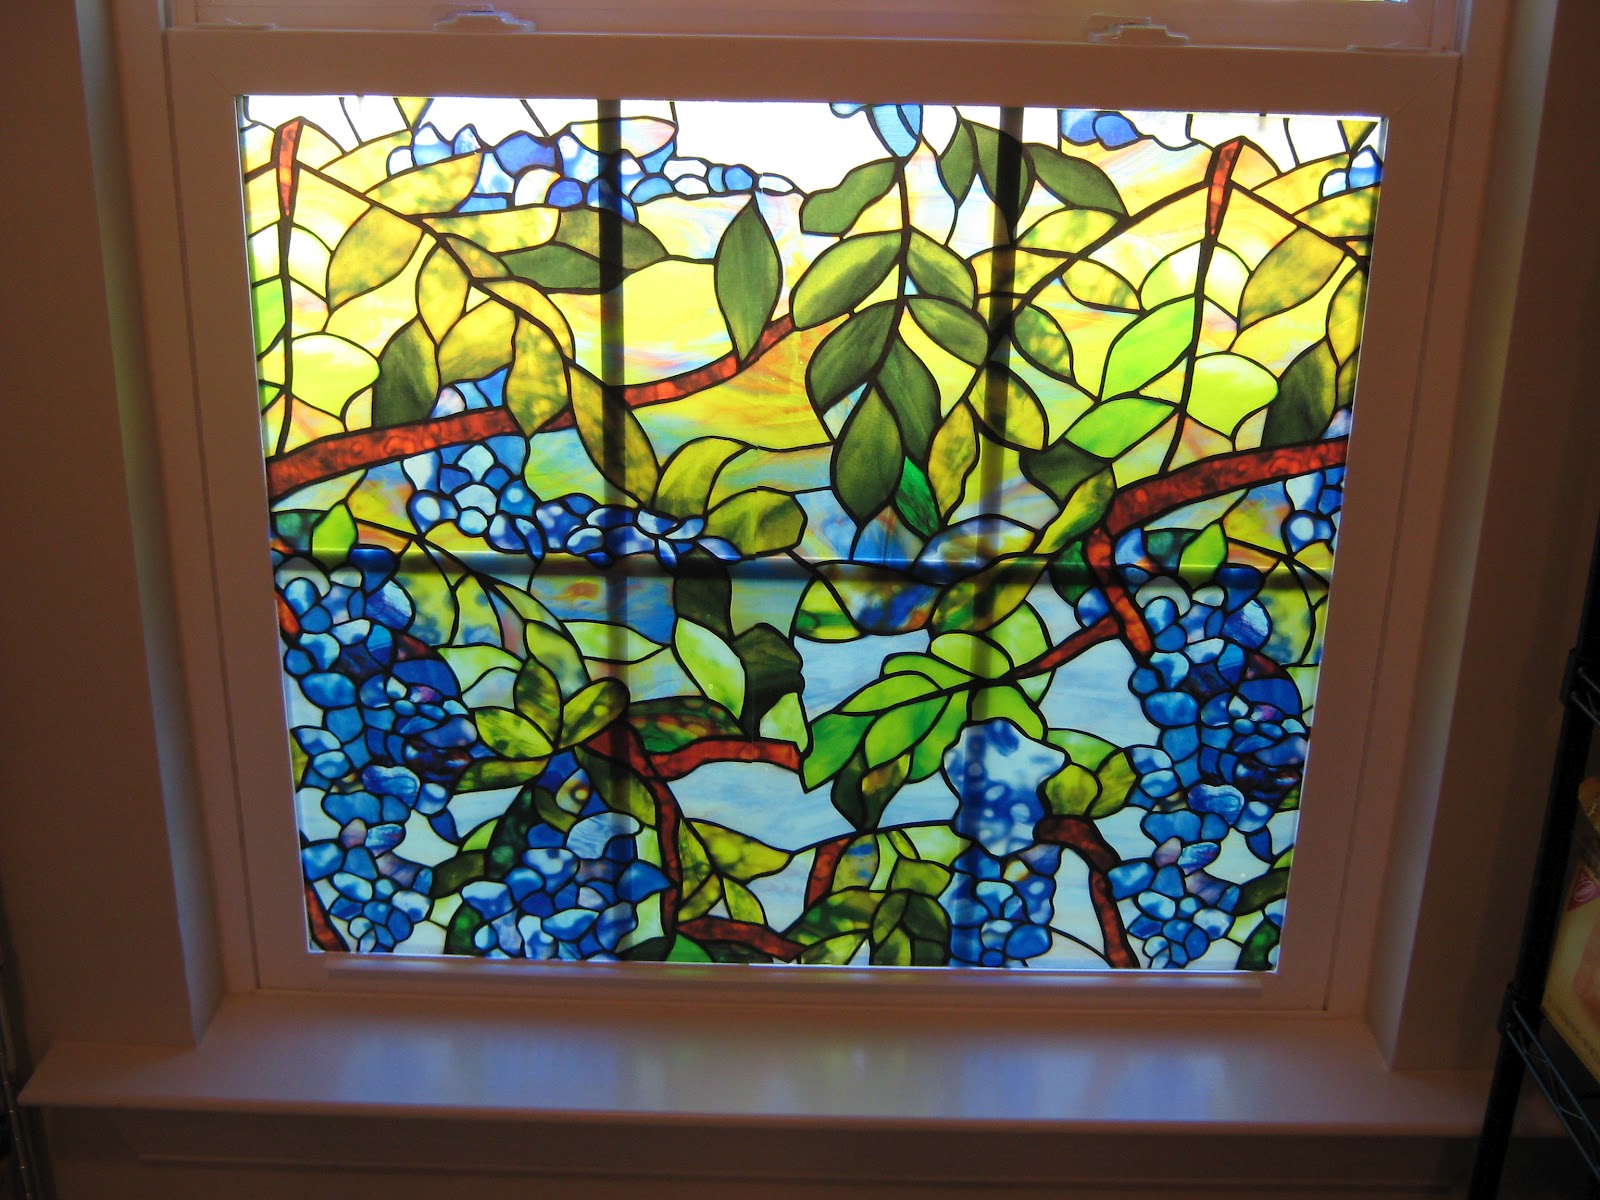 Fake stained glass window